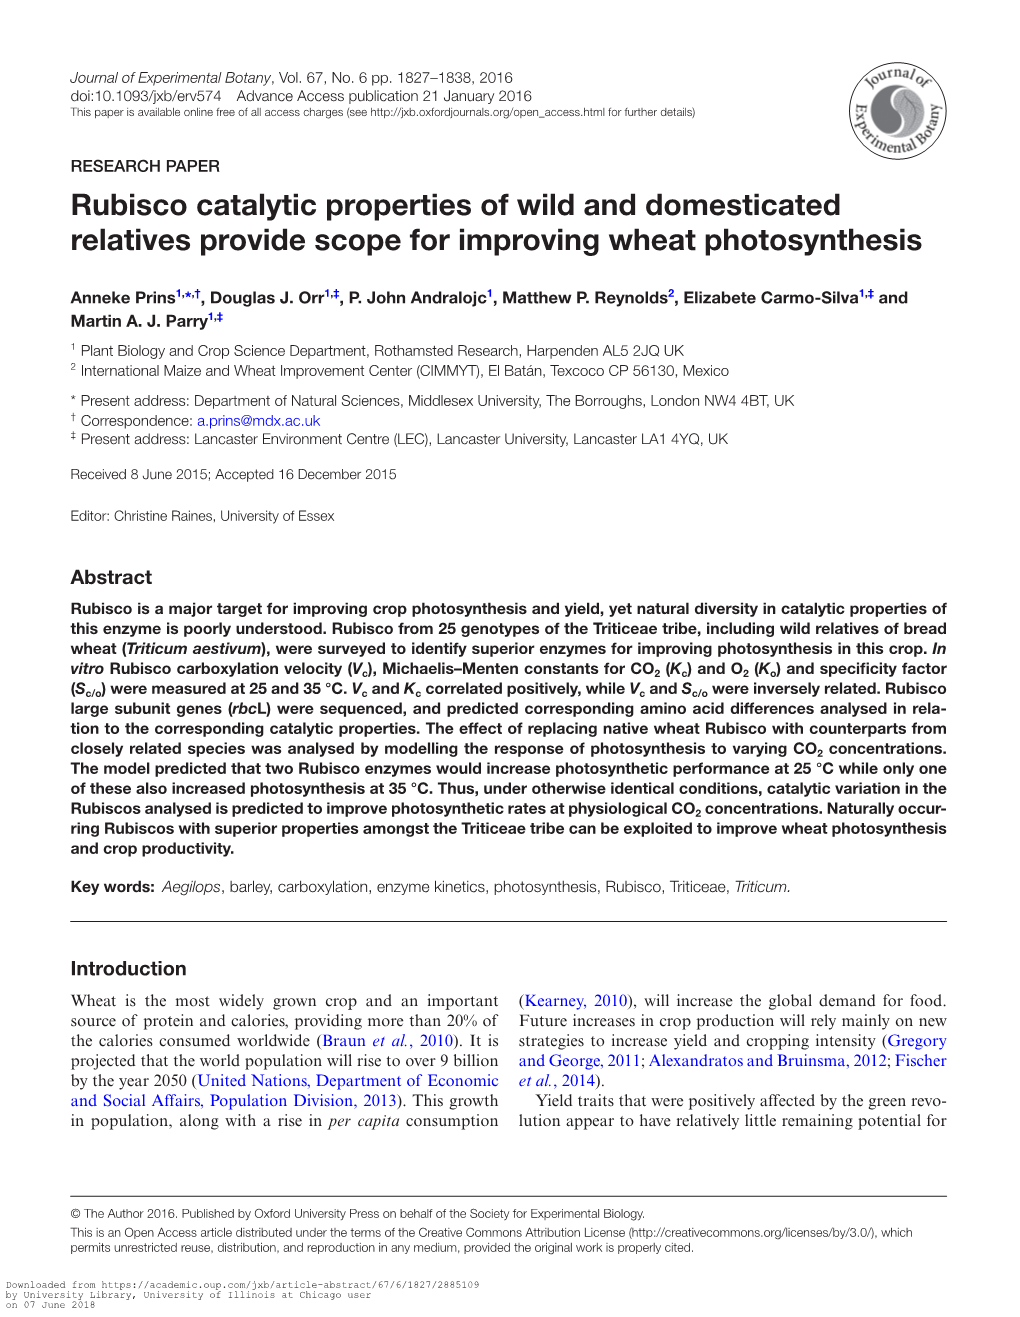 Rubisco Catalytic Properties of Wild and Domesticated Relatives Provide Scope for Improving Wheat Photosynthesis